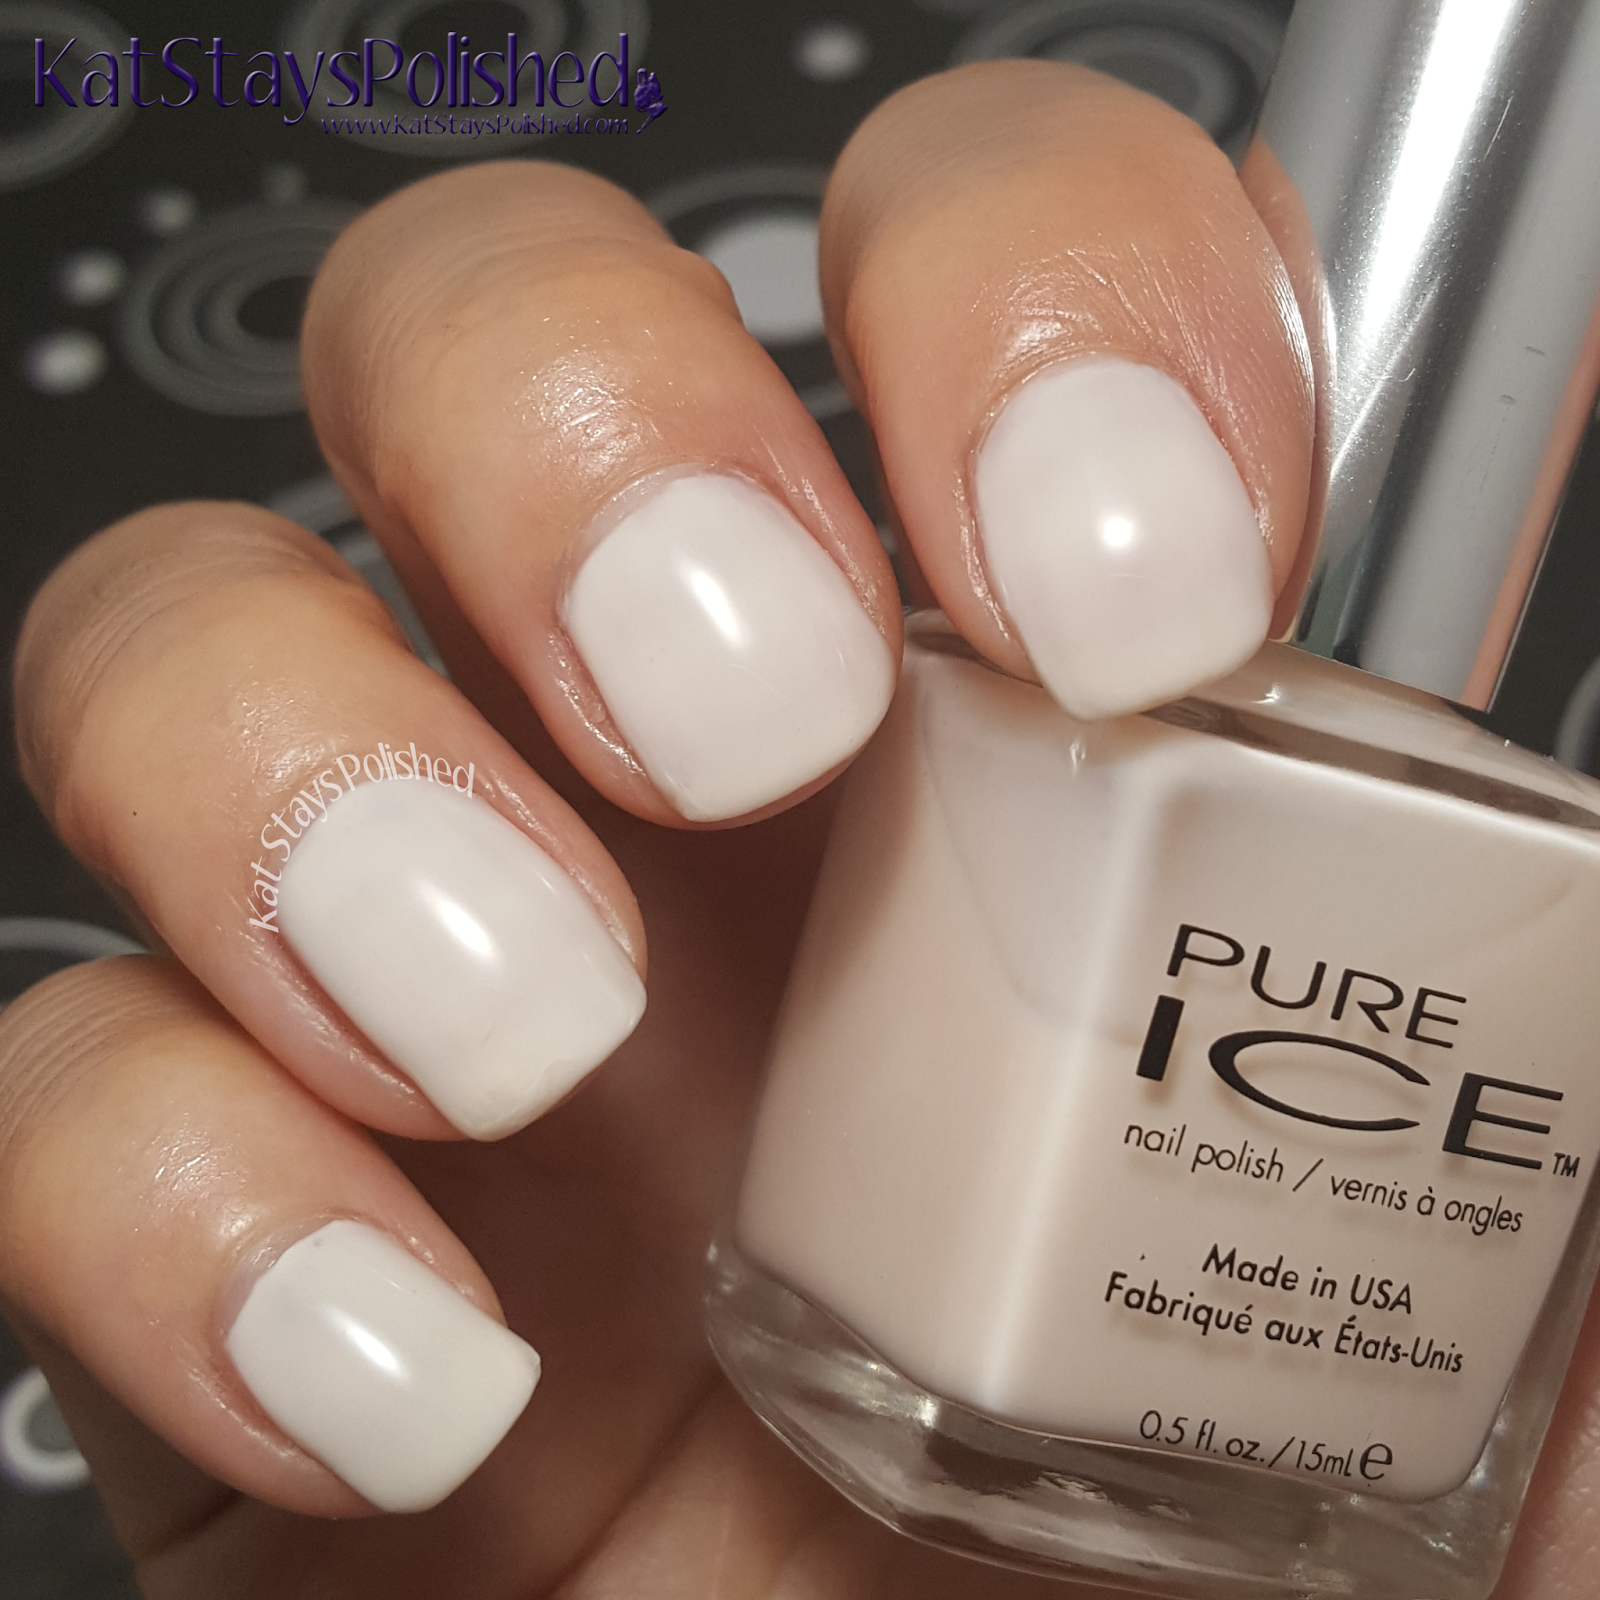 Kat Stays Polished | Beauty Blog with a Dash of Life: Pure Ice Cream Shades  - My Nail Palate Cleansers